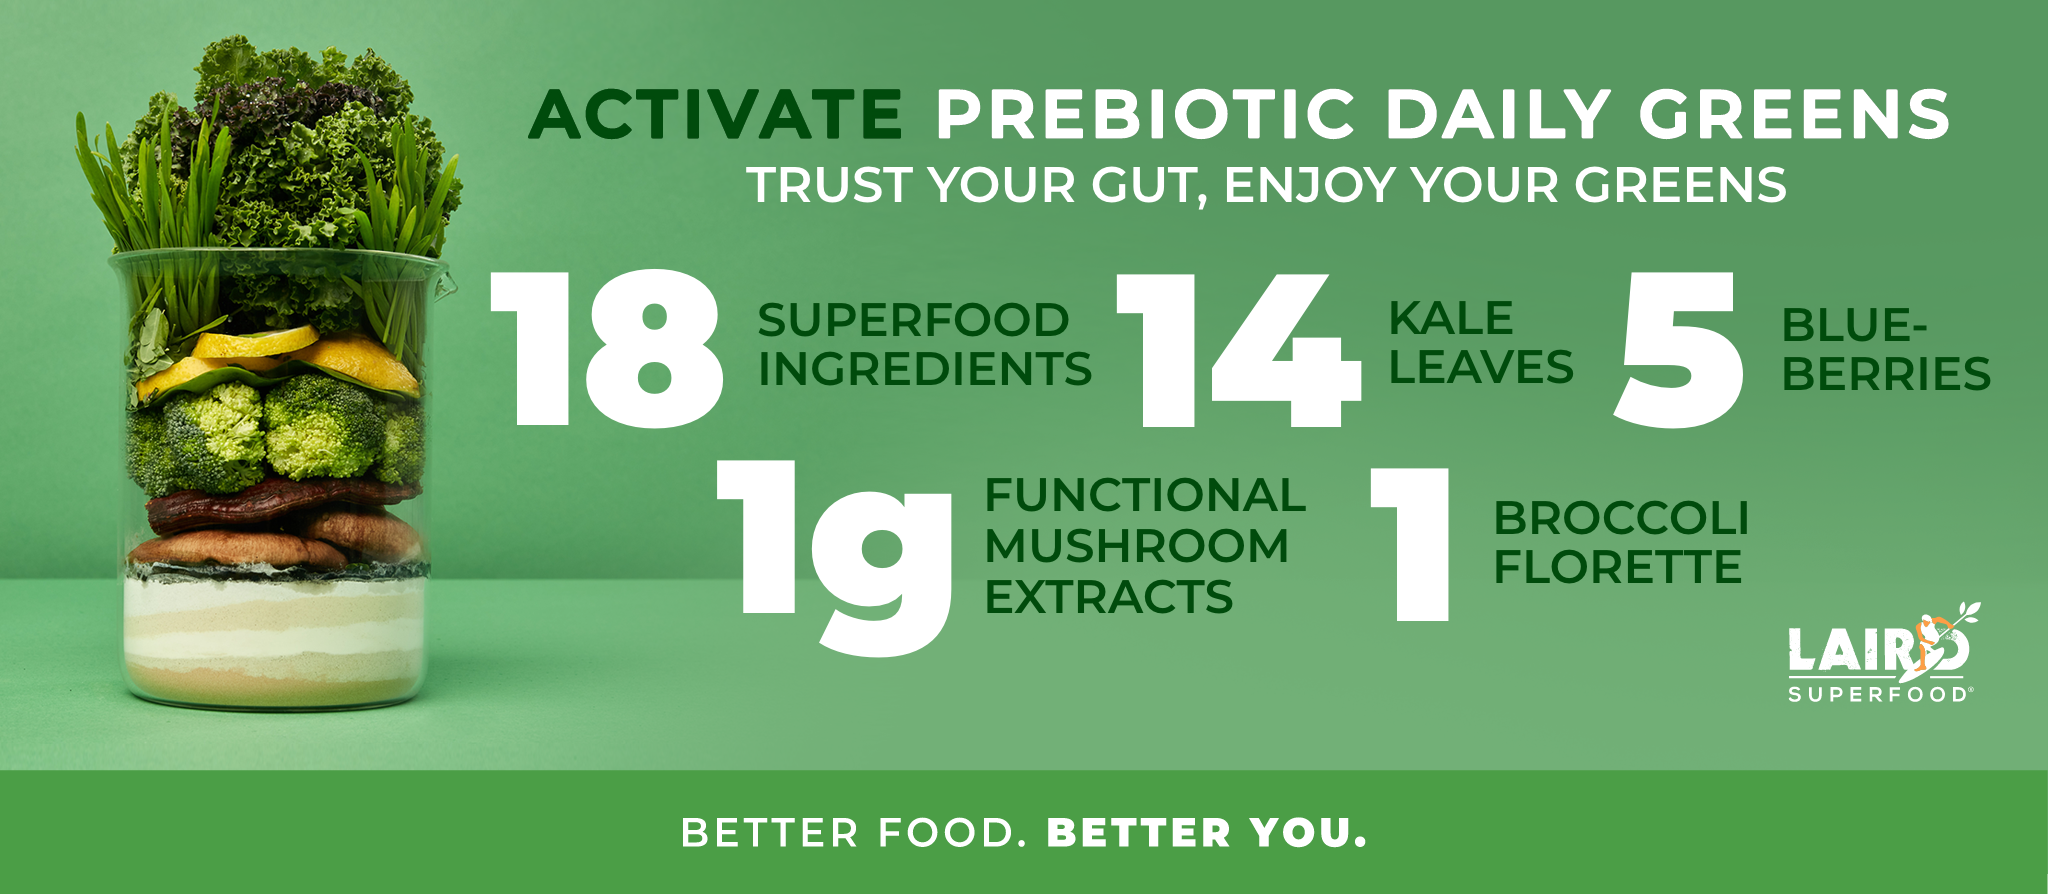 Activate Prebiotic Daily Greens help keep the guy healthy. Enjoy your greens. Drink daily. 18 superfood ingredients, 14 kale leaves,5 blueberries, 1g functional mushroom extracts, and 1 broccoli florette. Better food. Better you.